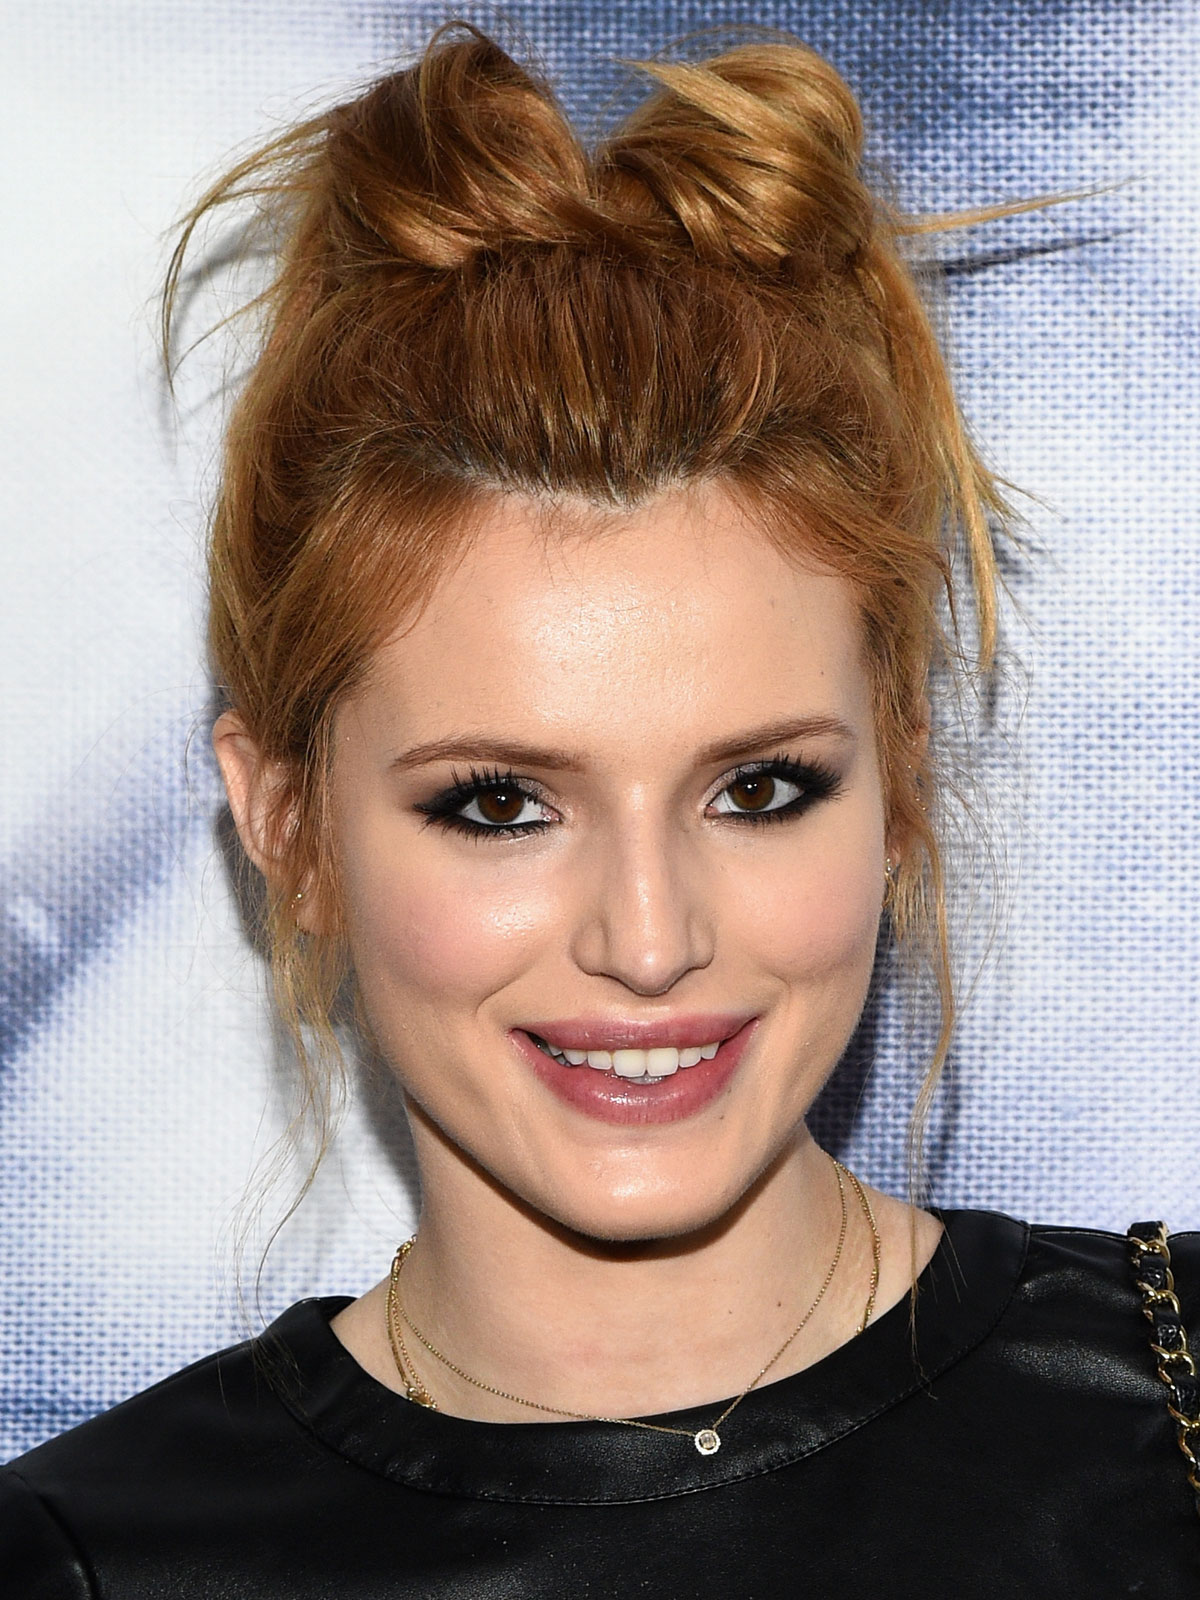 Bella Thorne attends Refinery29 Holiday Party